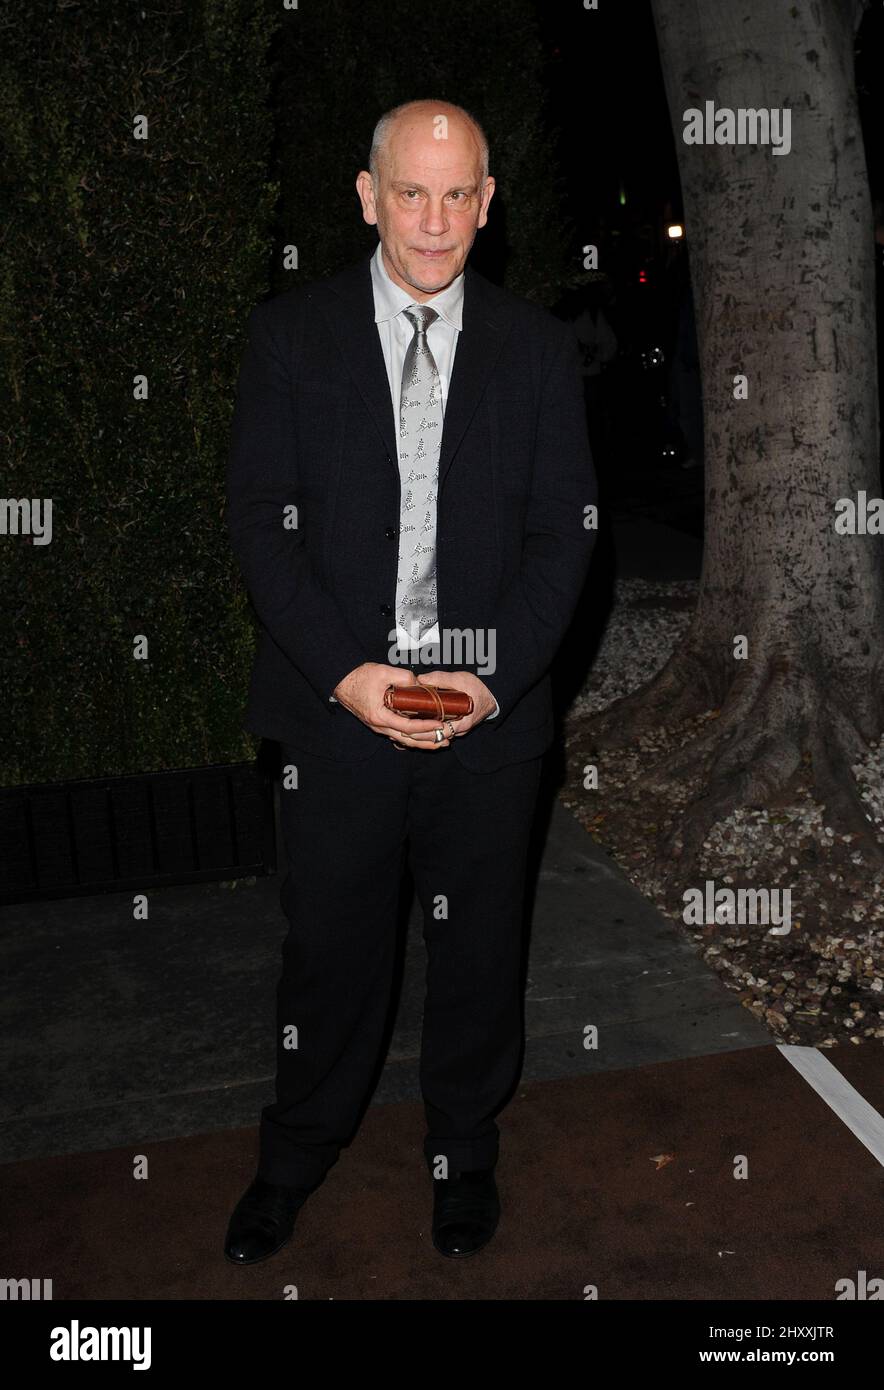 John Malkovich attending the Chanel Pre-Oscar Dinner held at Madeo Restaurant in Los Angeles, USA. Stock Photo